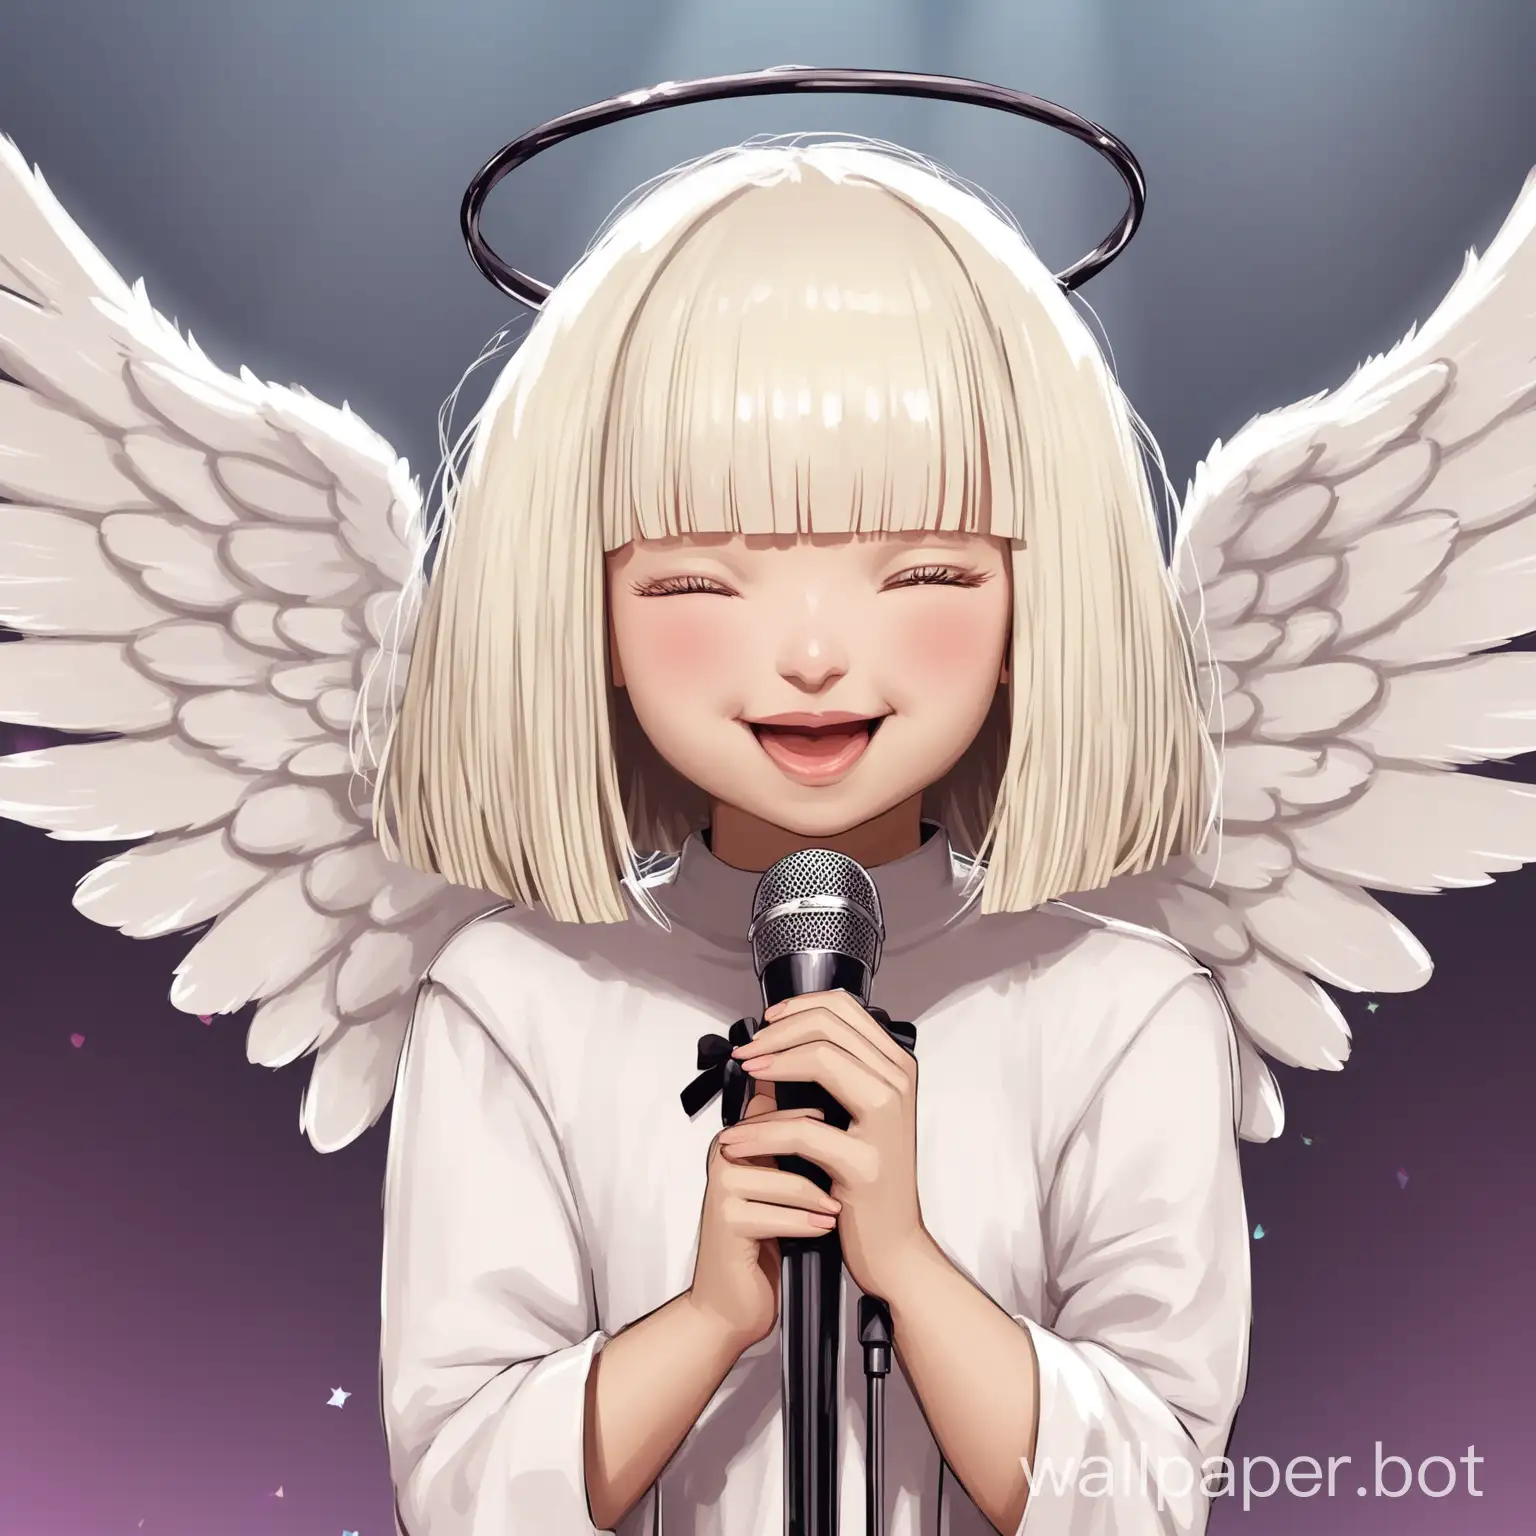 Adorable-Sia-Singing-Angel-Spreads-Love